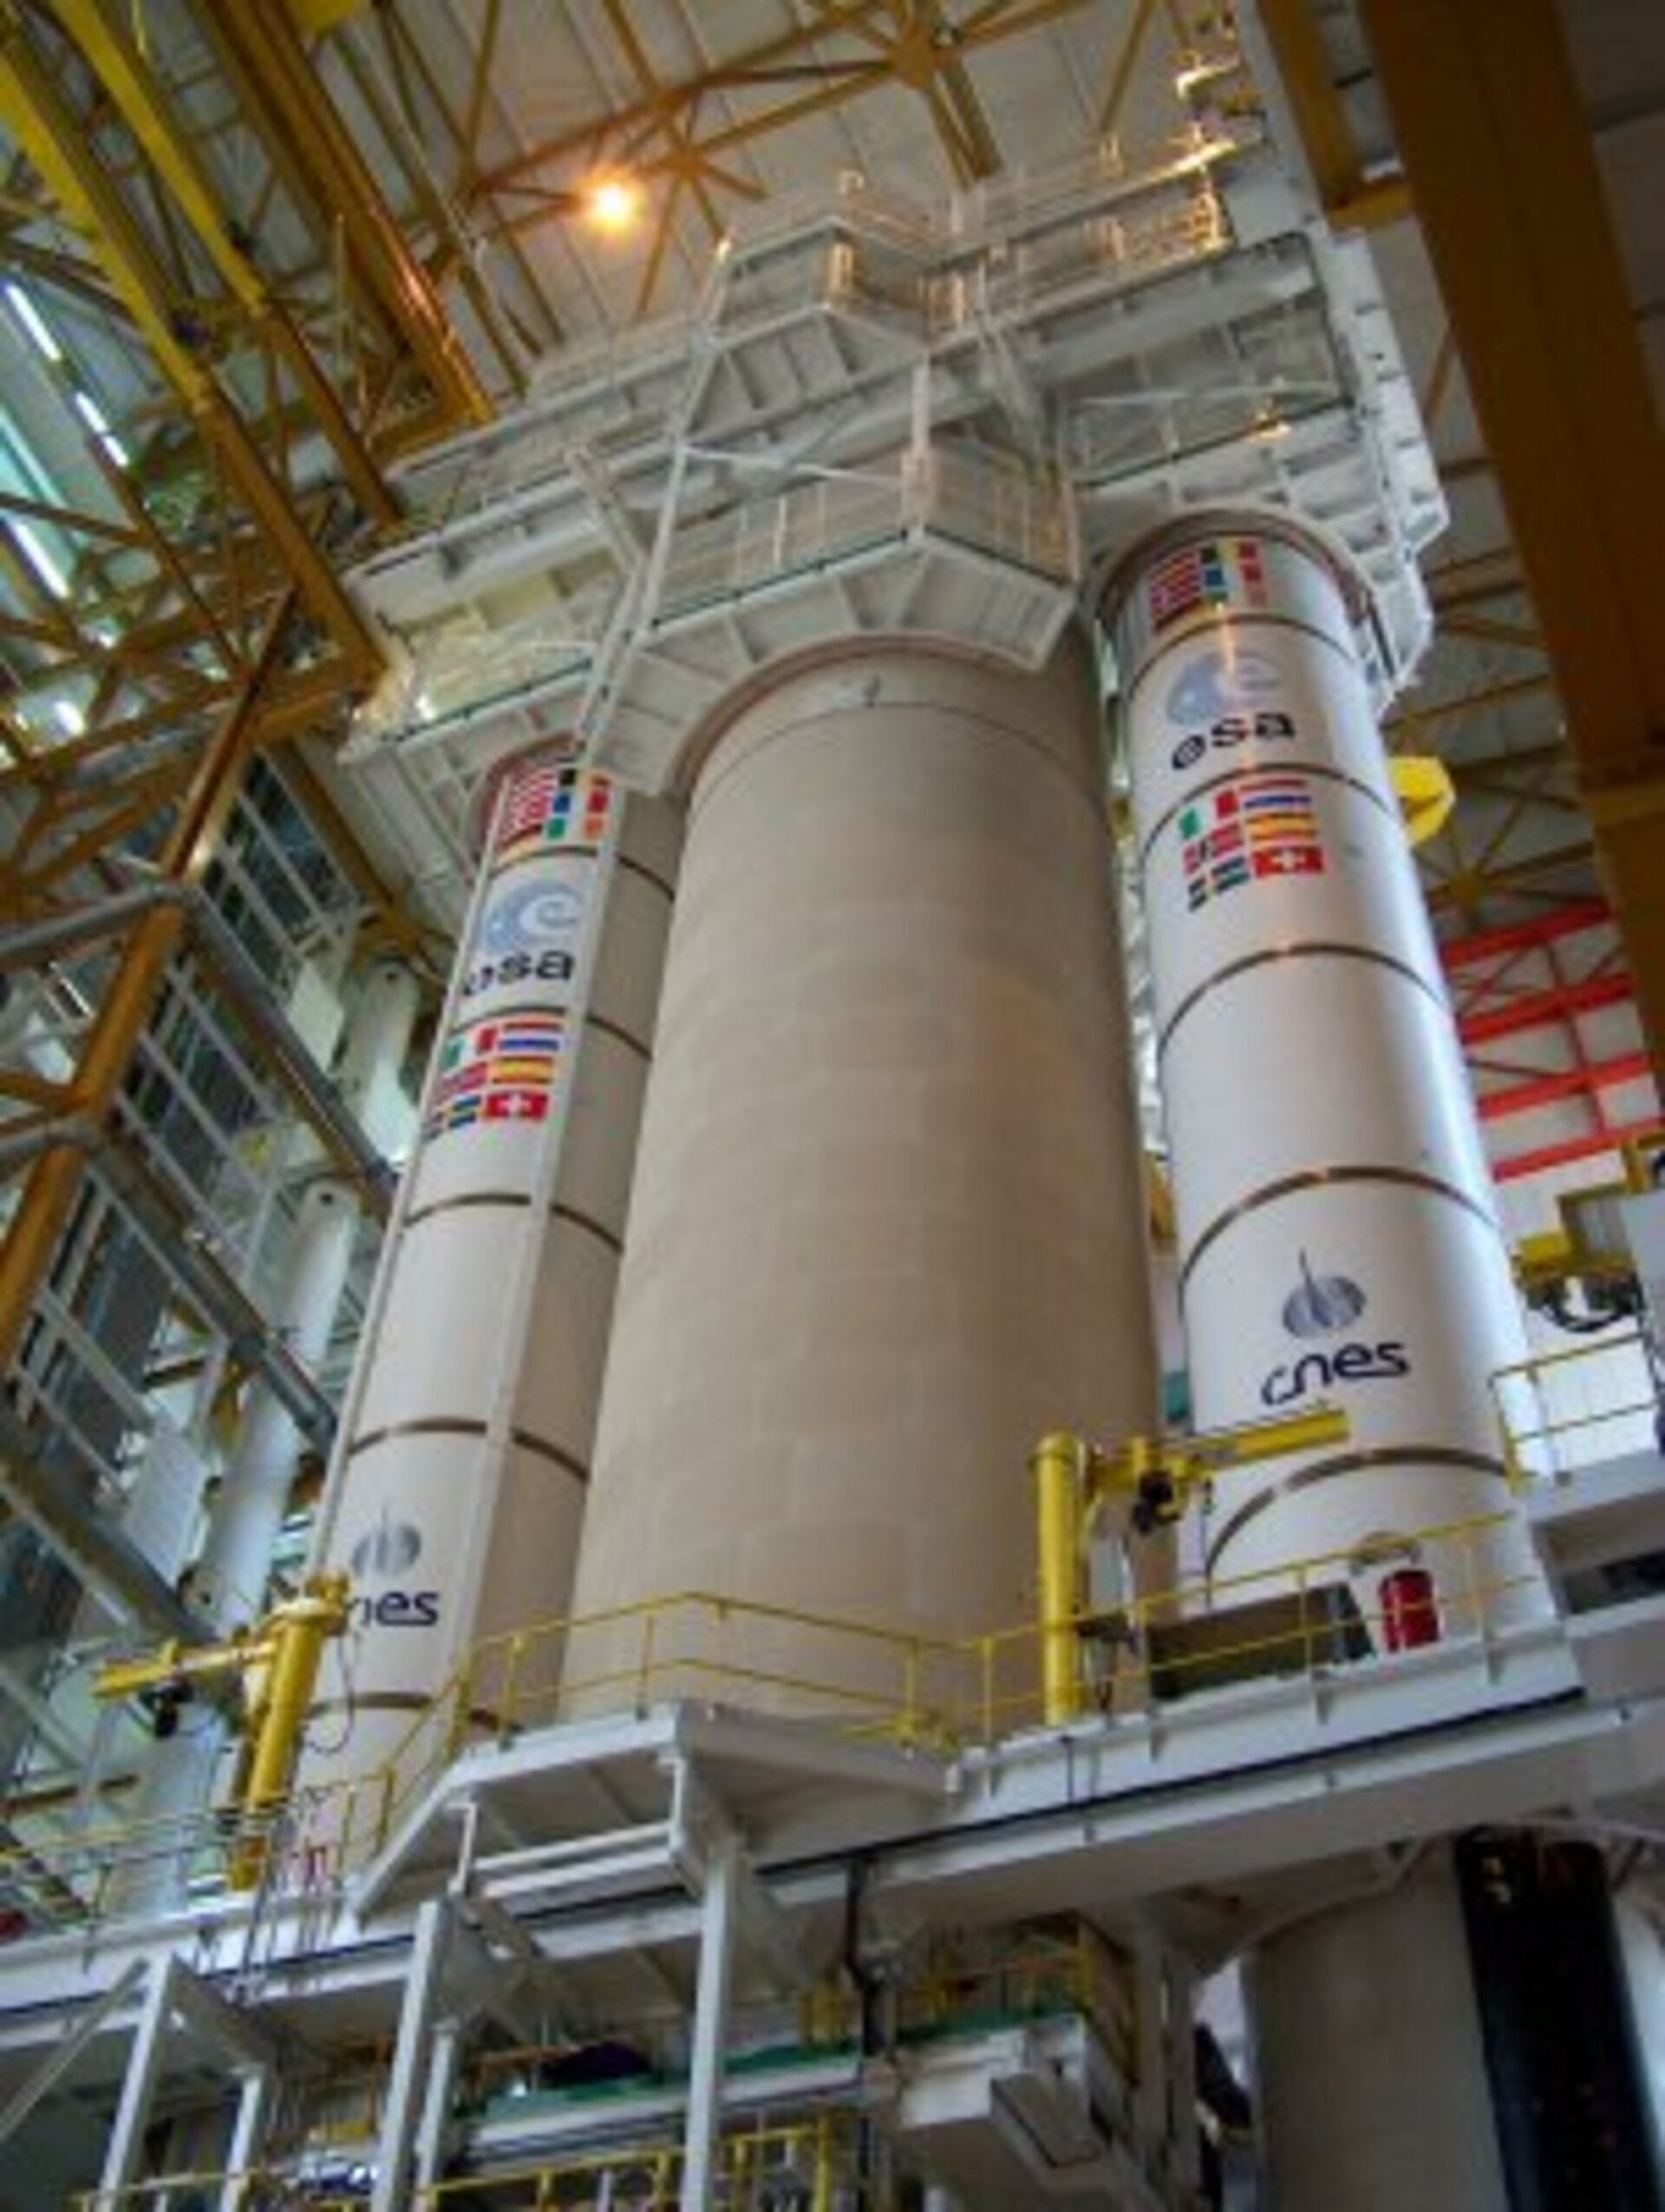 During V162 countdown on September 27, 2003 is the next Ariane 5 launcher being prepared in the BIL building